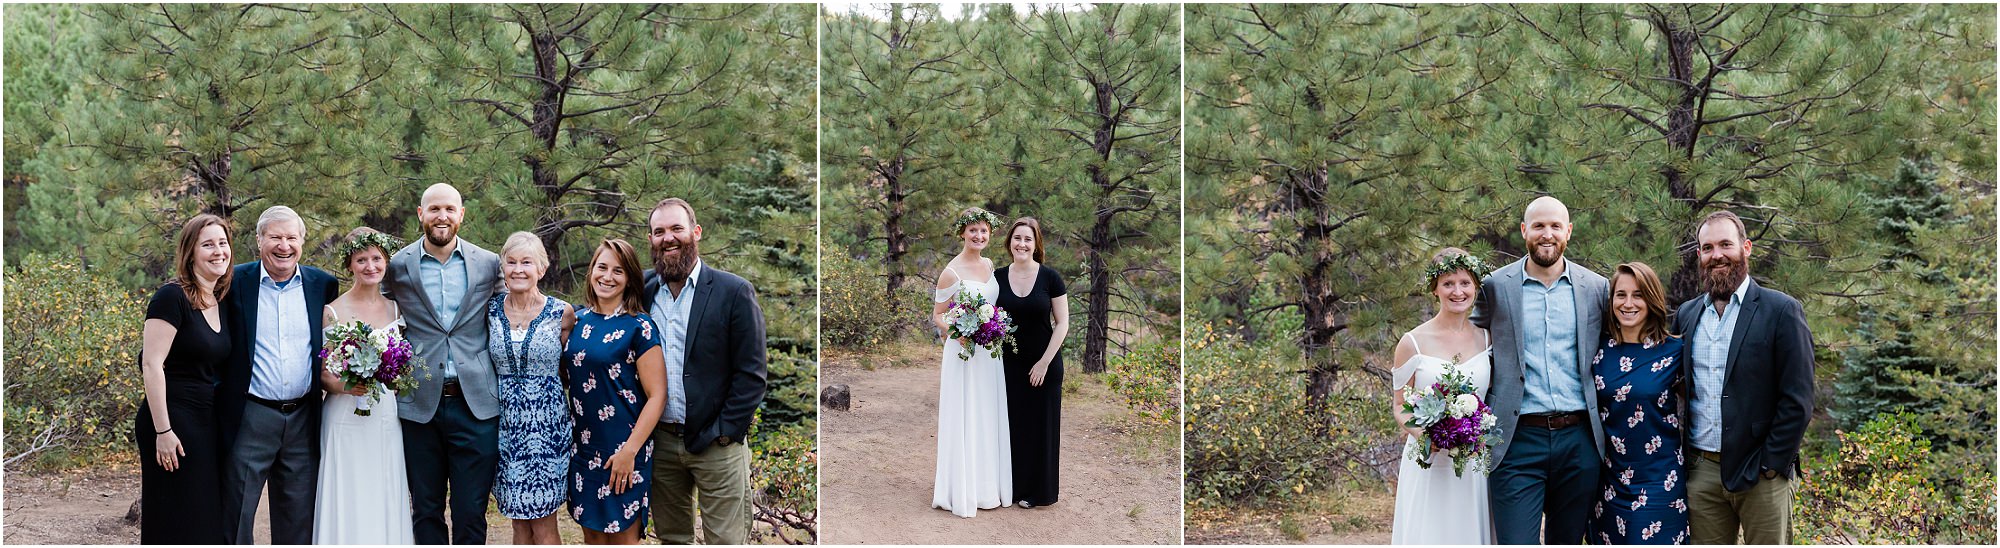 A bride and groom pose with their family & friends for formal portraits in the pine trees of Bend, Oregon. | Erica Swantek Photography